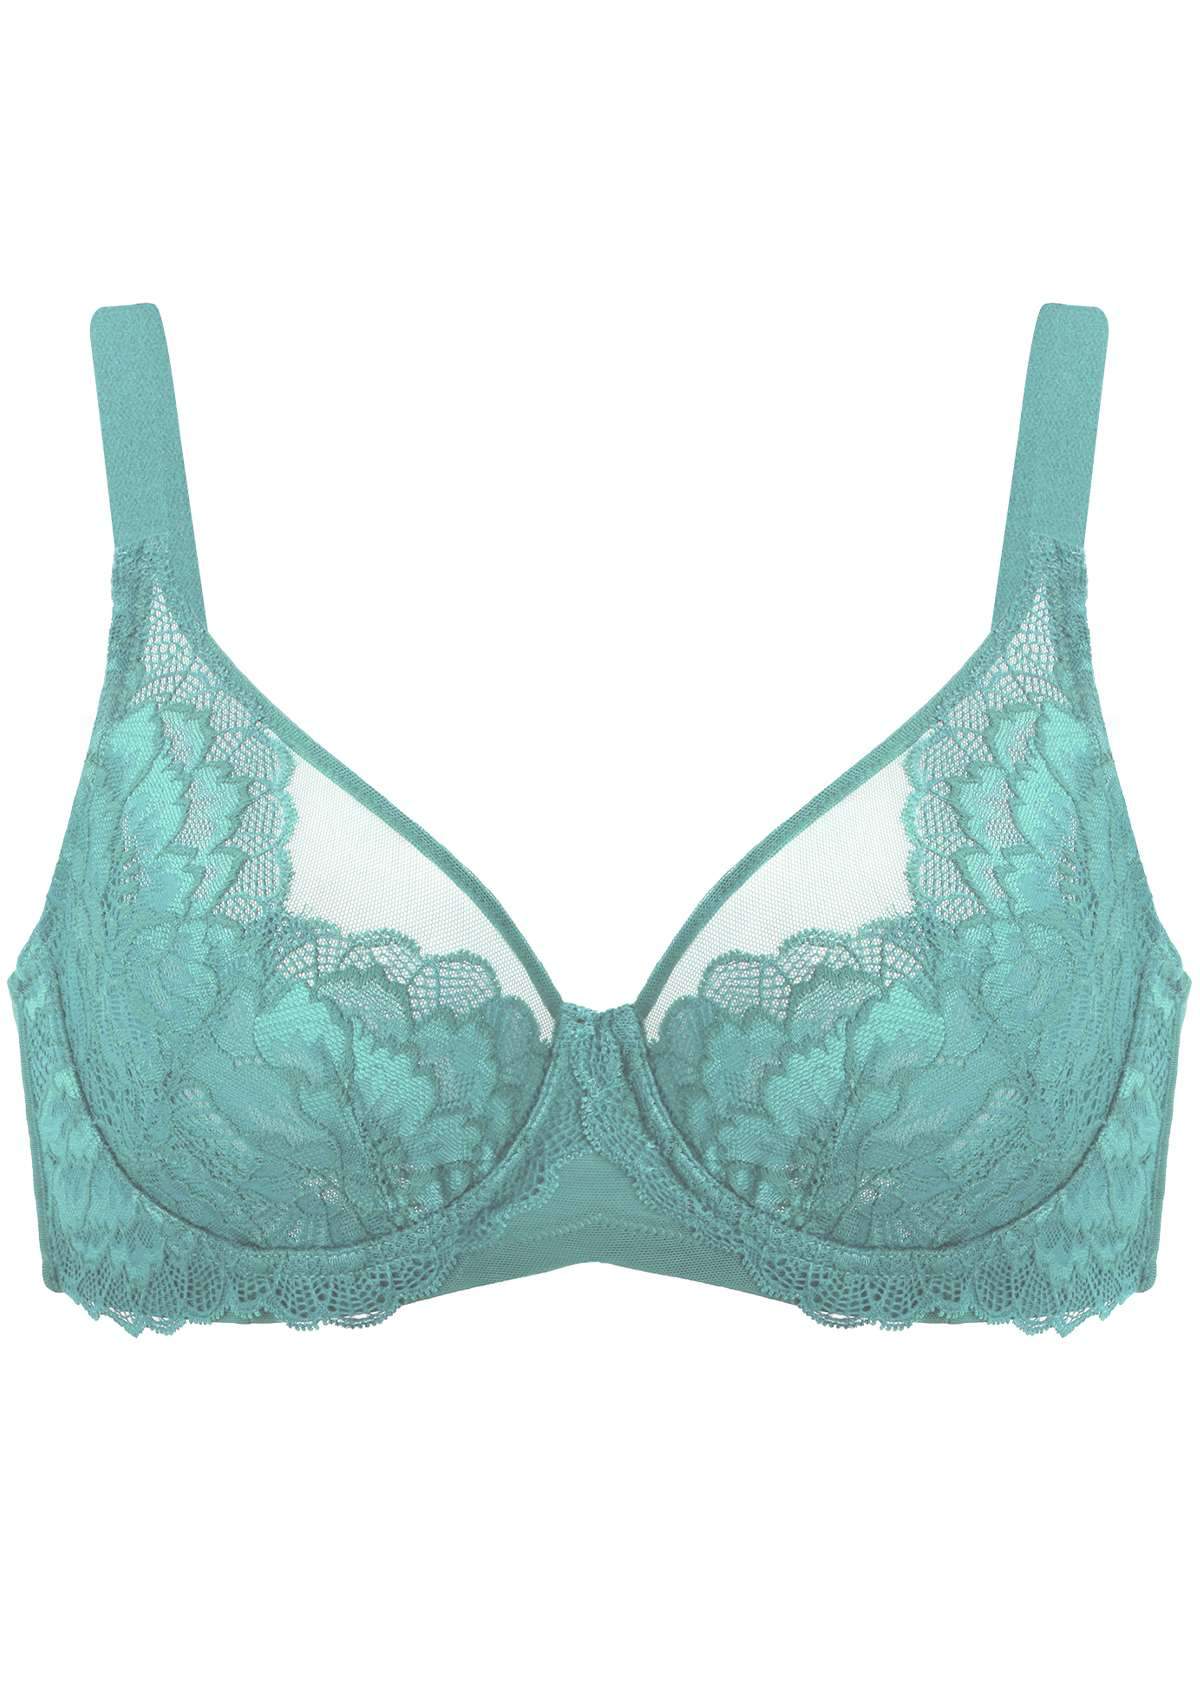 HSIA Paeonia Lace Full Coverage Underwire Non-Padded Uplifting Bra - Purple / 42 / C